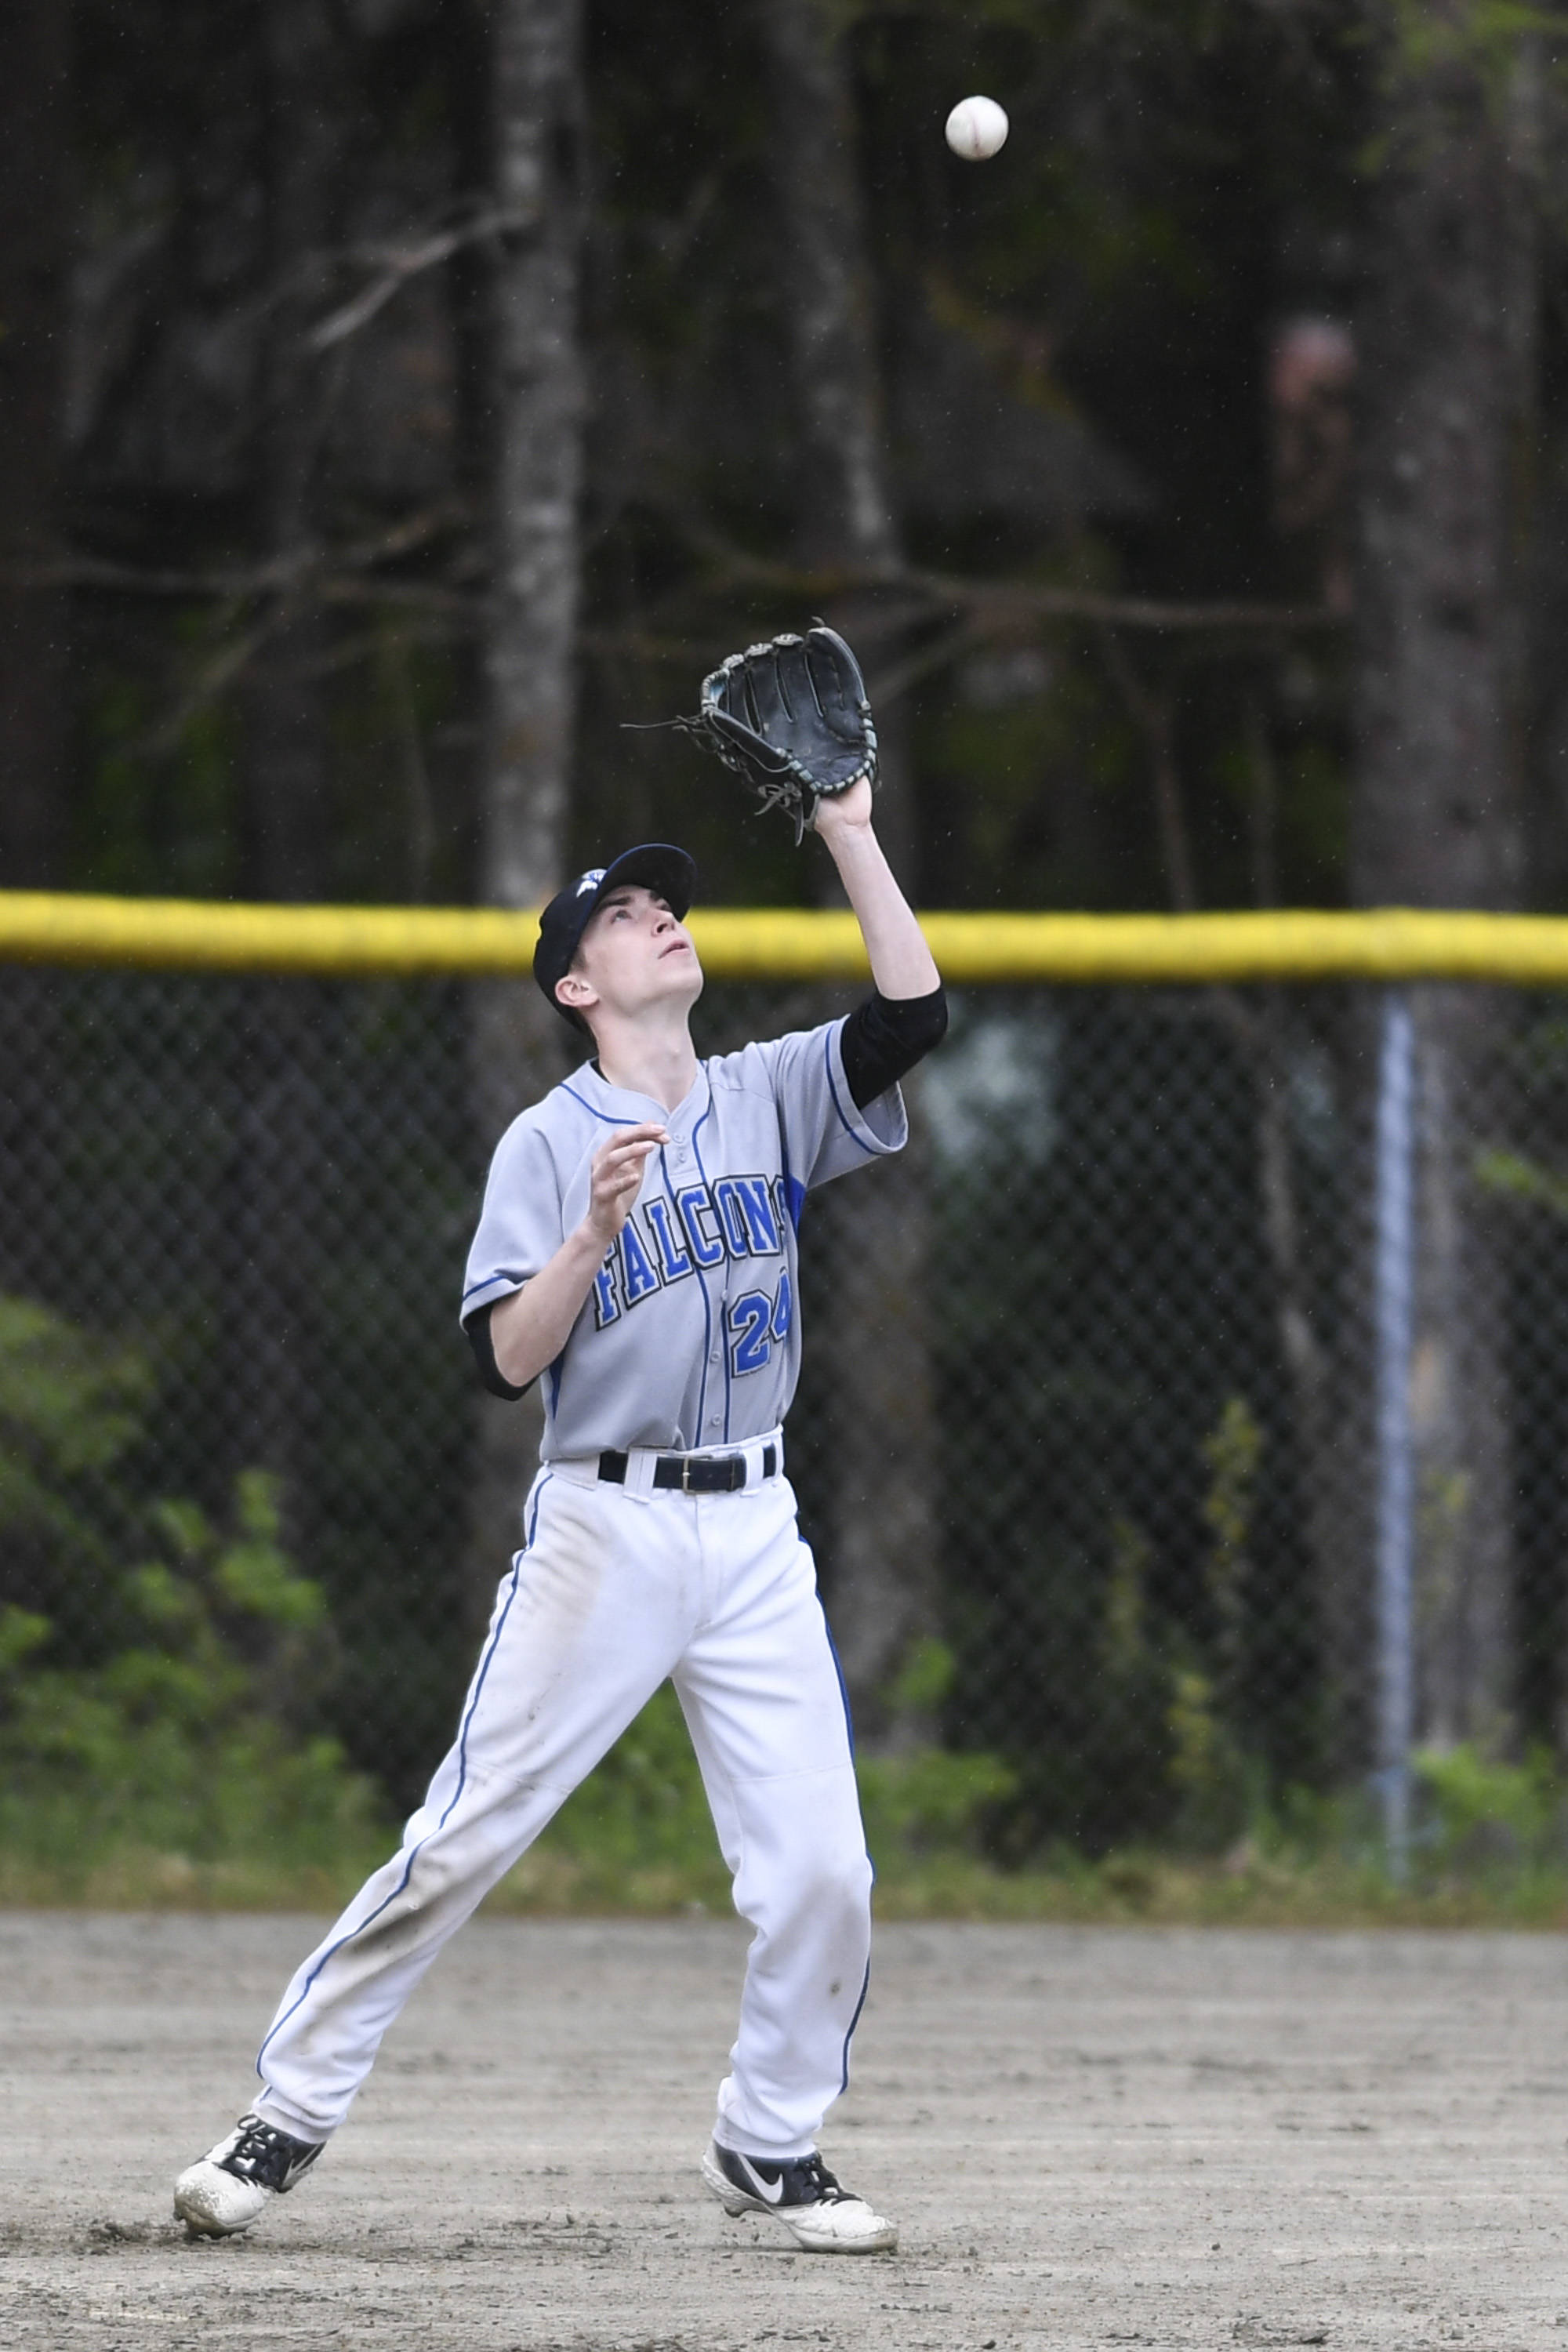 Thunder Mountain’s Josh Carte catches a flyball against Petersburg during the Region V Baseball Championship at Adair-Kennedy Memorial Park on Thursday, May 23, 2019. Petersburg won 4-1. (Michael Penn | Juneau Empire)